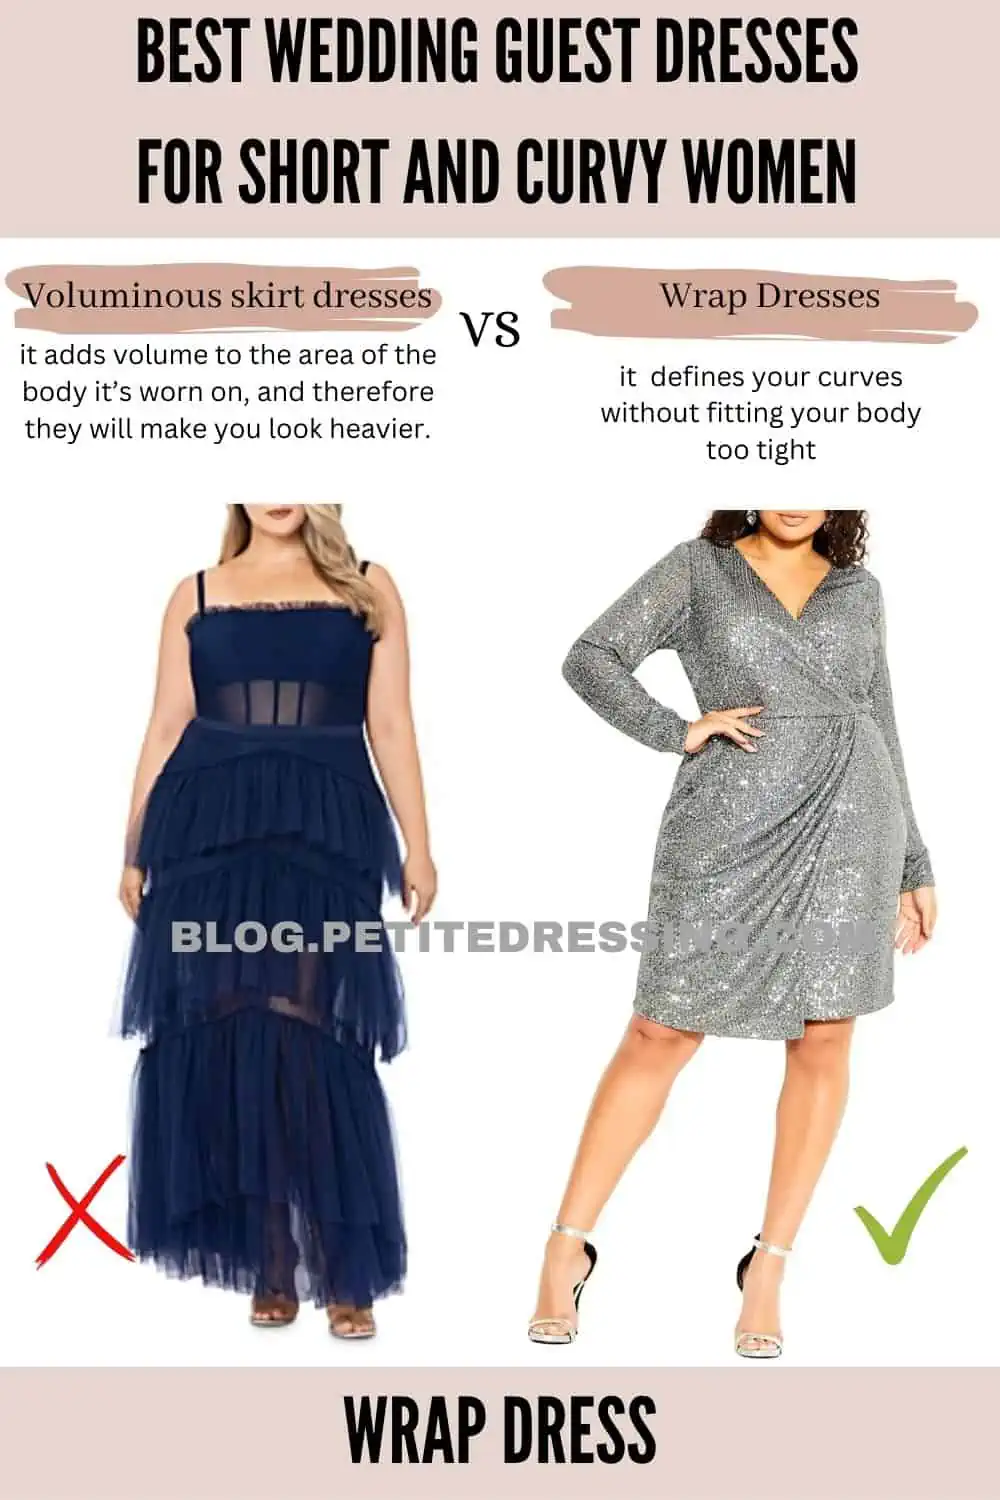 Finding a wedding guest dress that fits my 36G chest and curvy